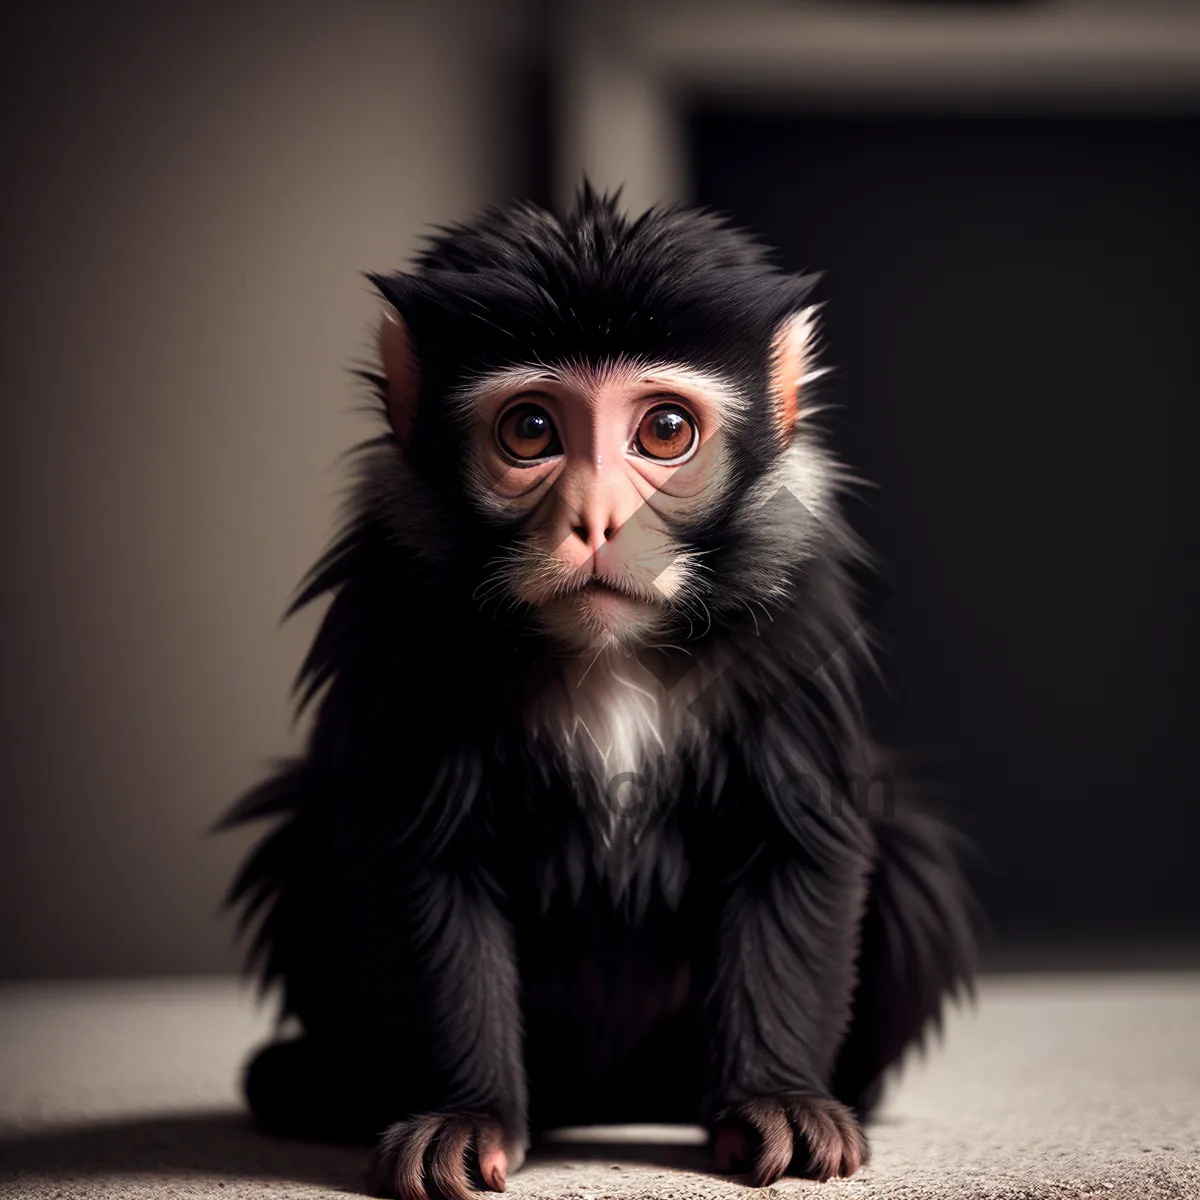 Picture of Cute Wild Primate Portrait with Furry Hair